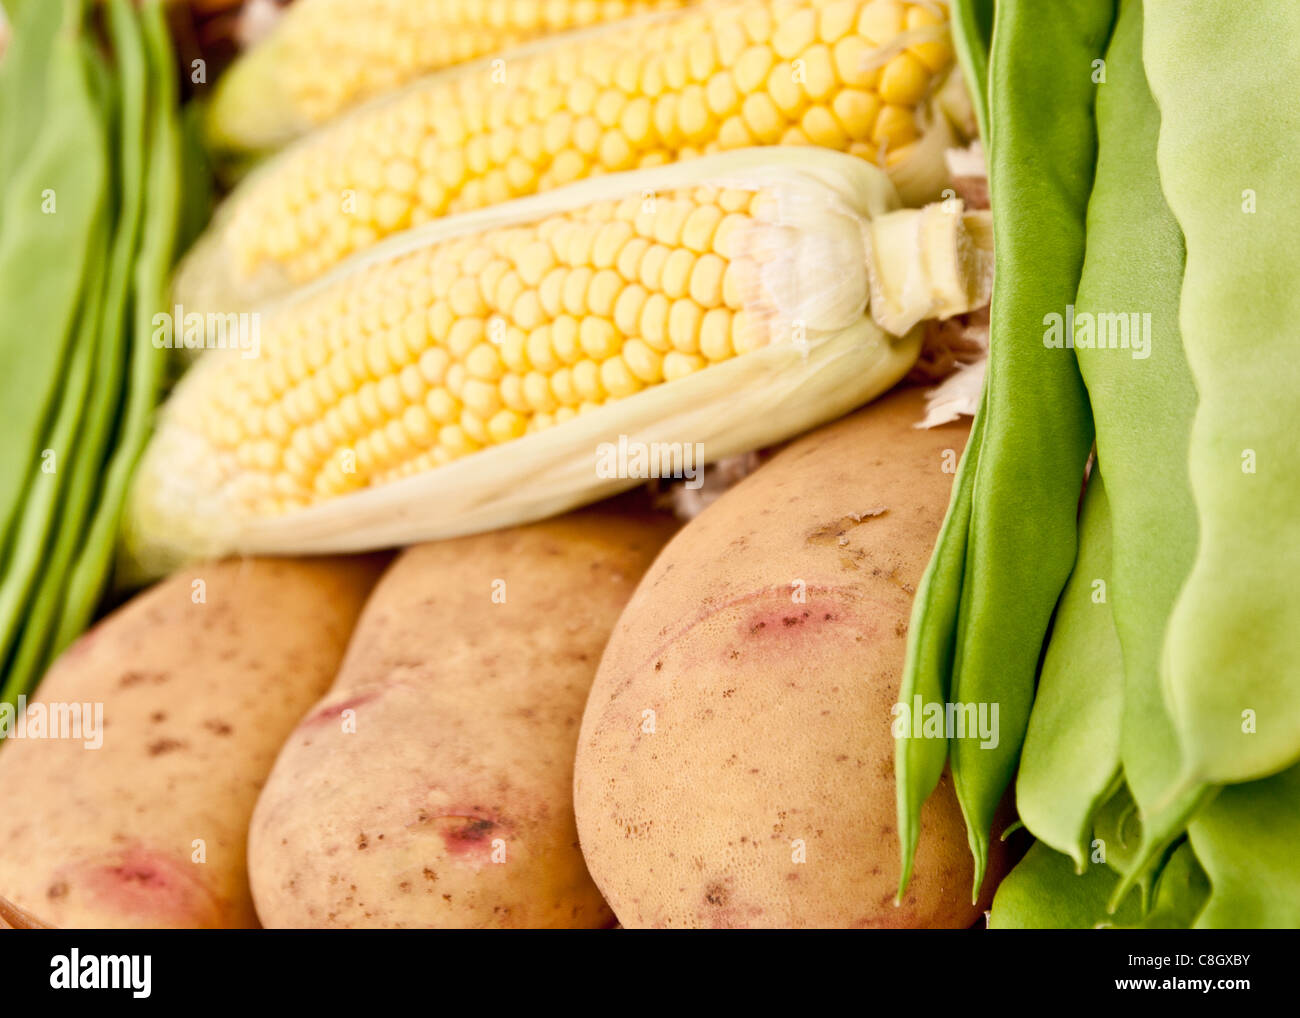 https://c8.alamy.com/comp/C8GXBY/homegrown-english-vegetables-C8GXBY.jpg